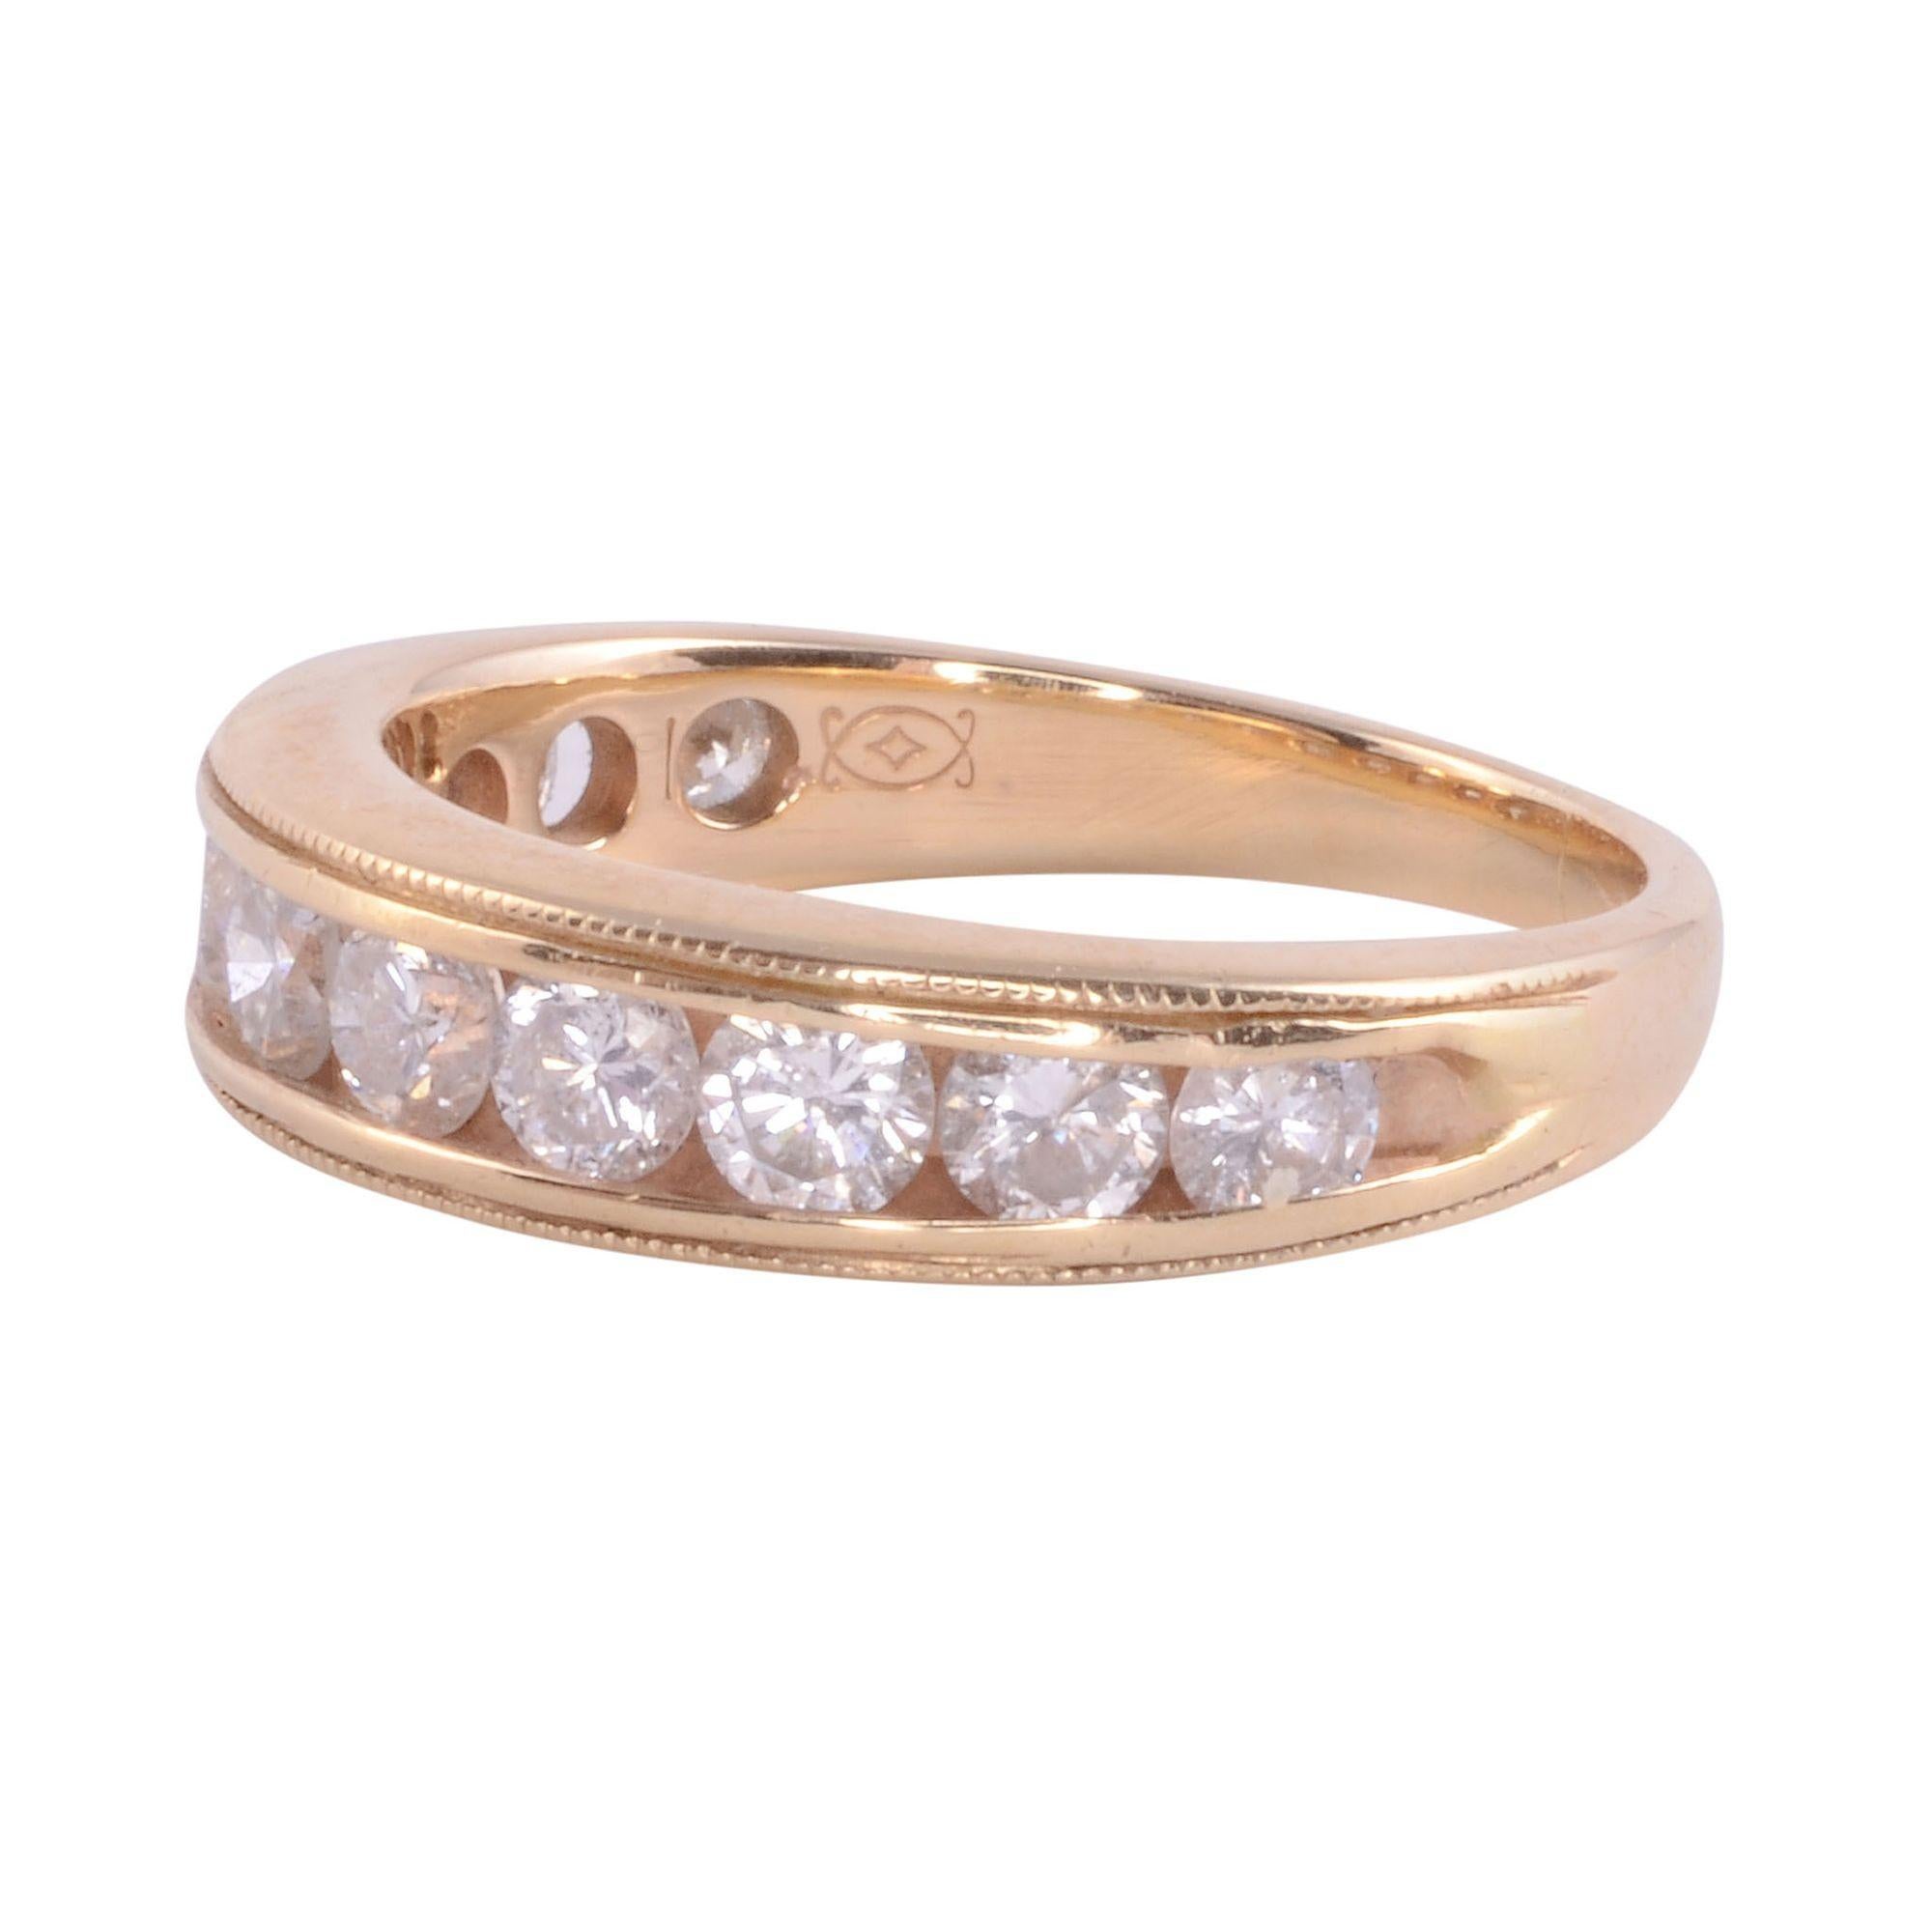 Estate 11 diamond 14KY band. This 14 karat yellow gold ring features 11 diamonds at .92 carat total weight. The diamonds have SI1 clarity and E-F color. This beautiful diamond band has milgrain detailing and is a size 5.25. [KIMH 127]
